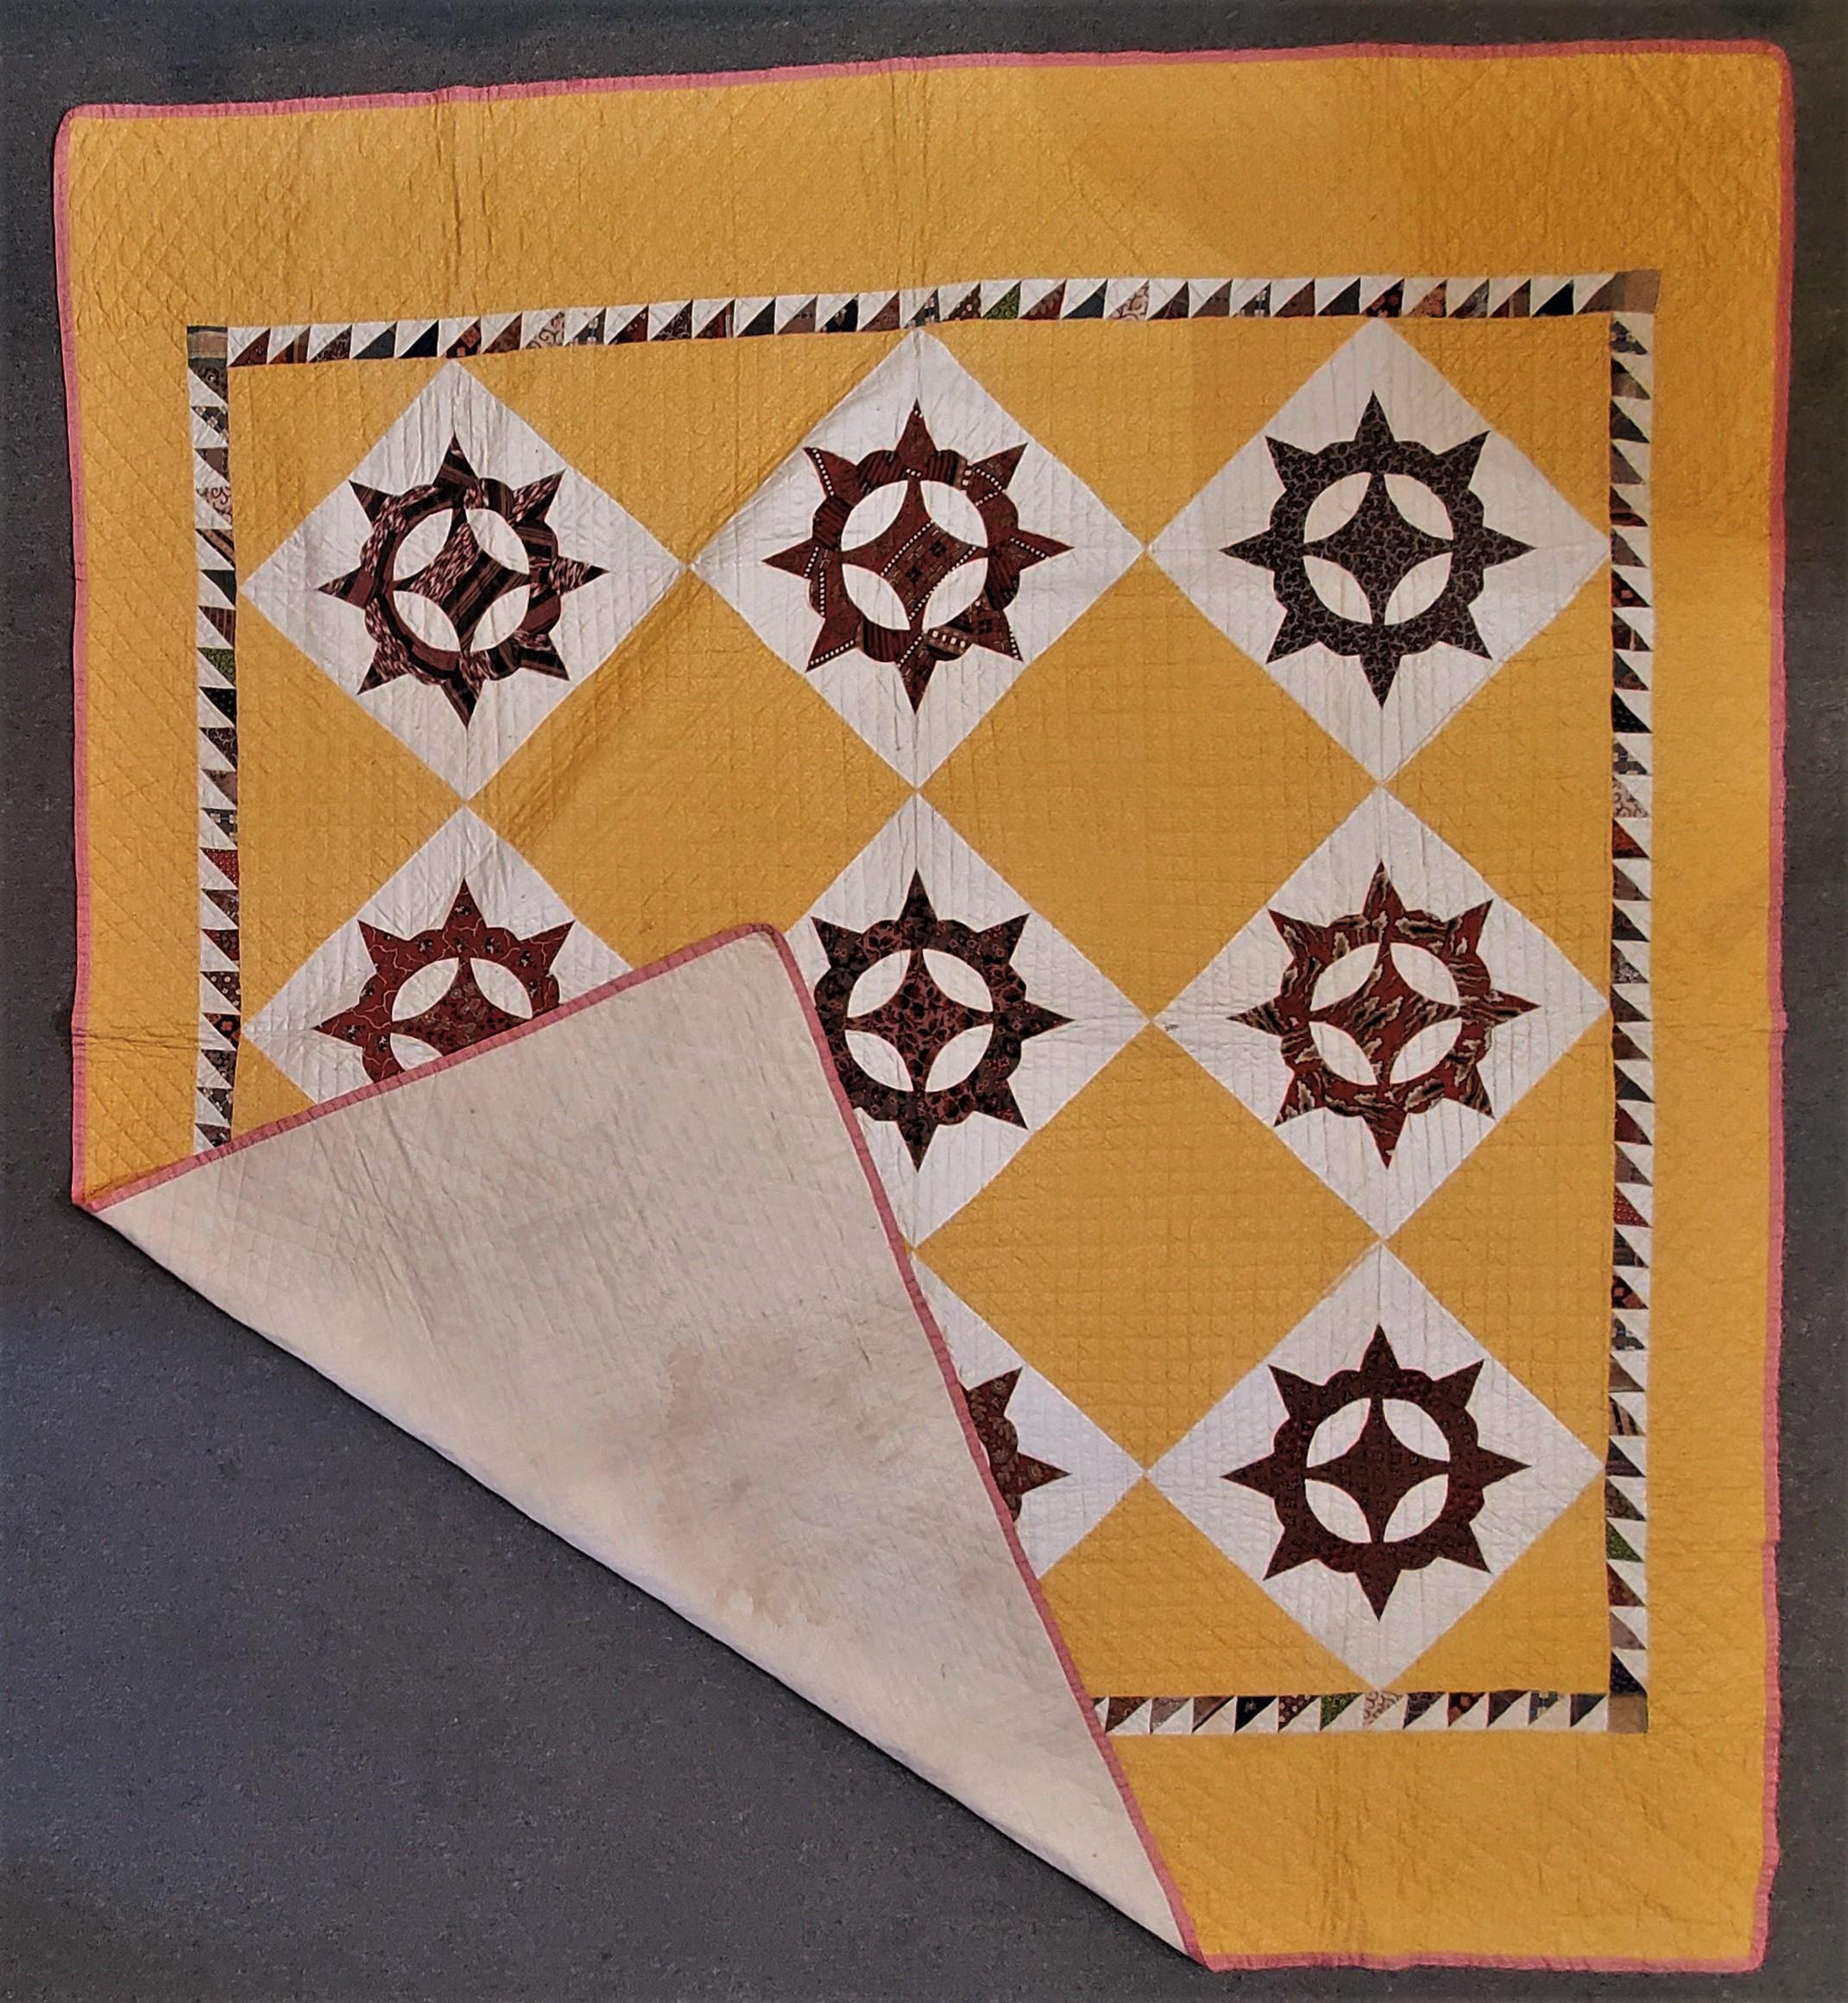 This fine and early unusual pattern Mariners compass wheel pattern quilt is in amazing pristine condition. The background fabric is a very rich tangerine calico fabric. The backing of the quilt is a cream unbleached muslin.